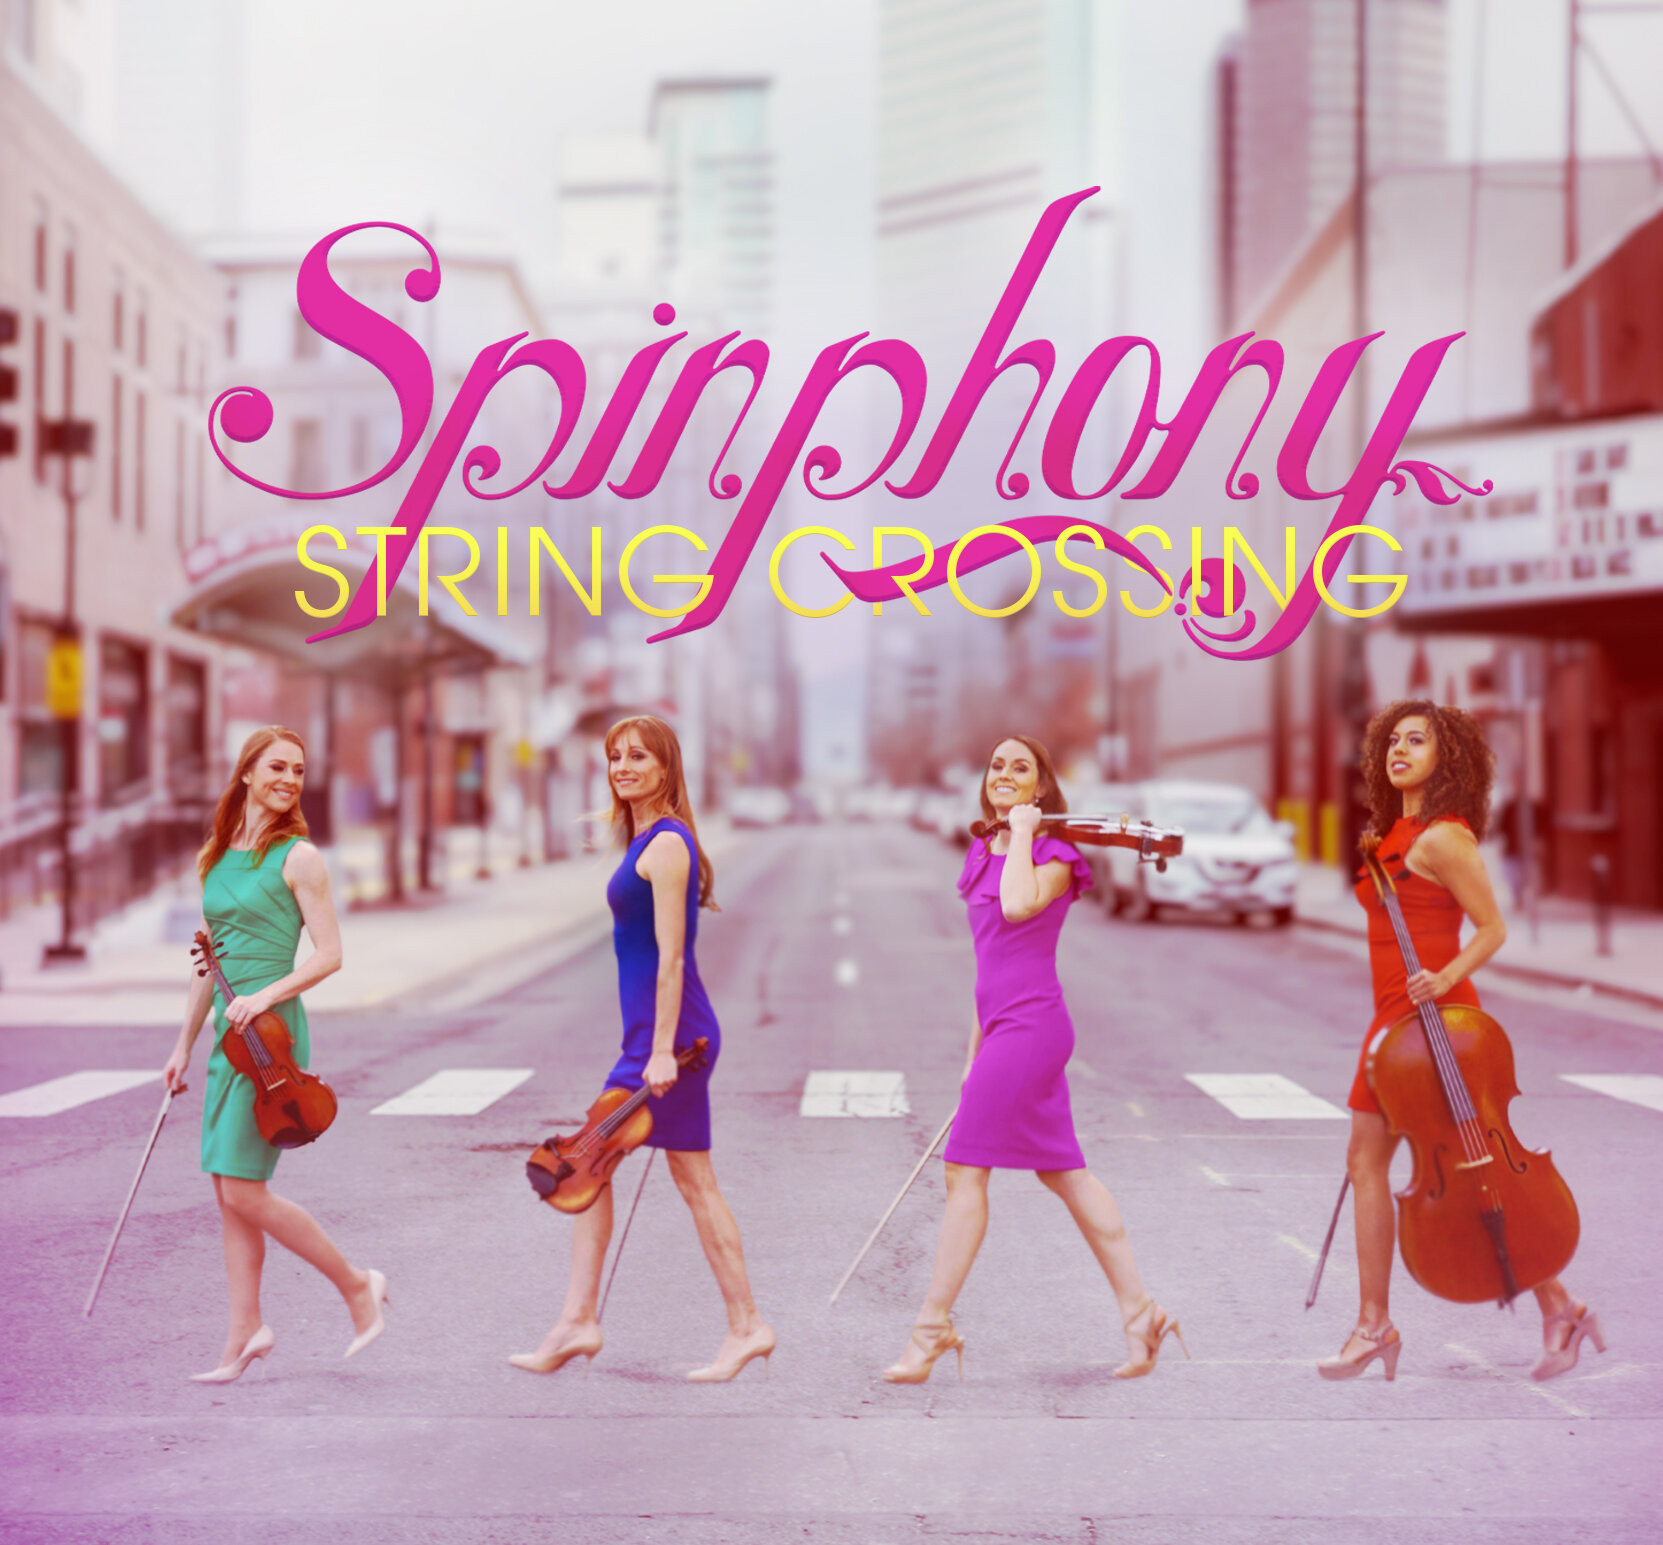 Spinphony String Crossing Album Cover